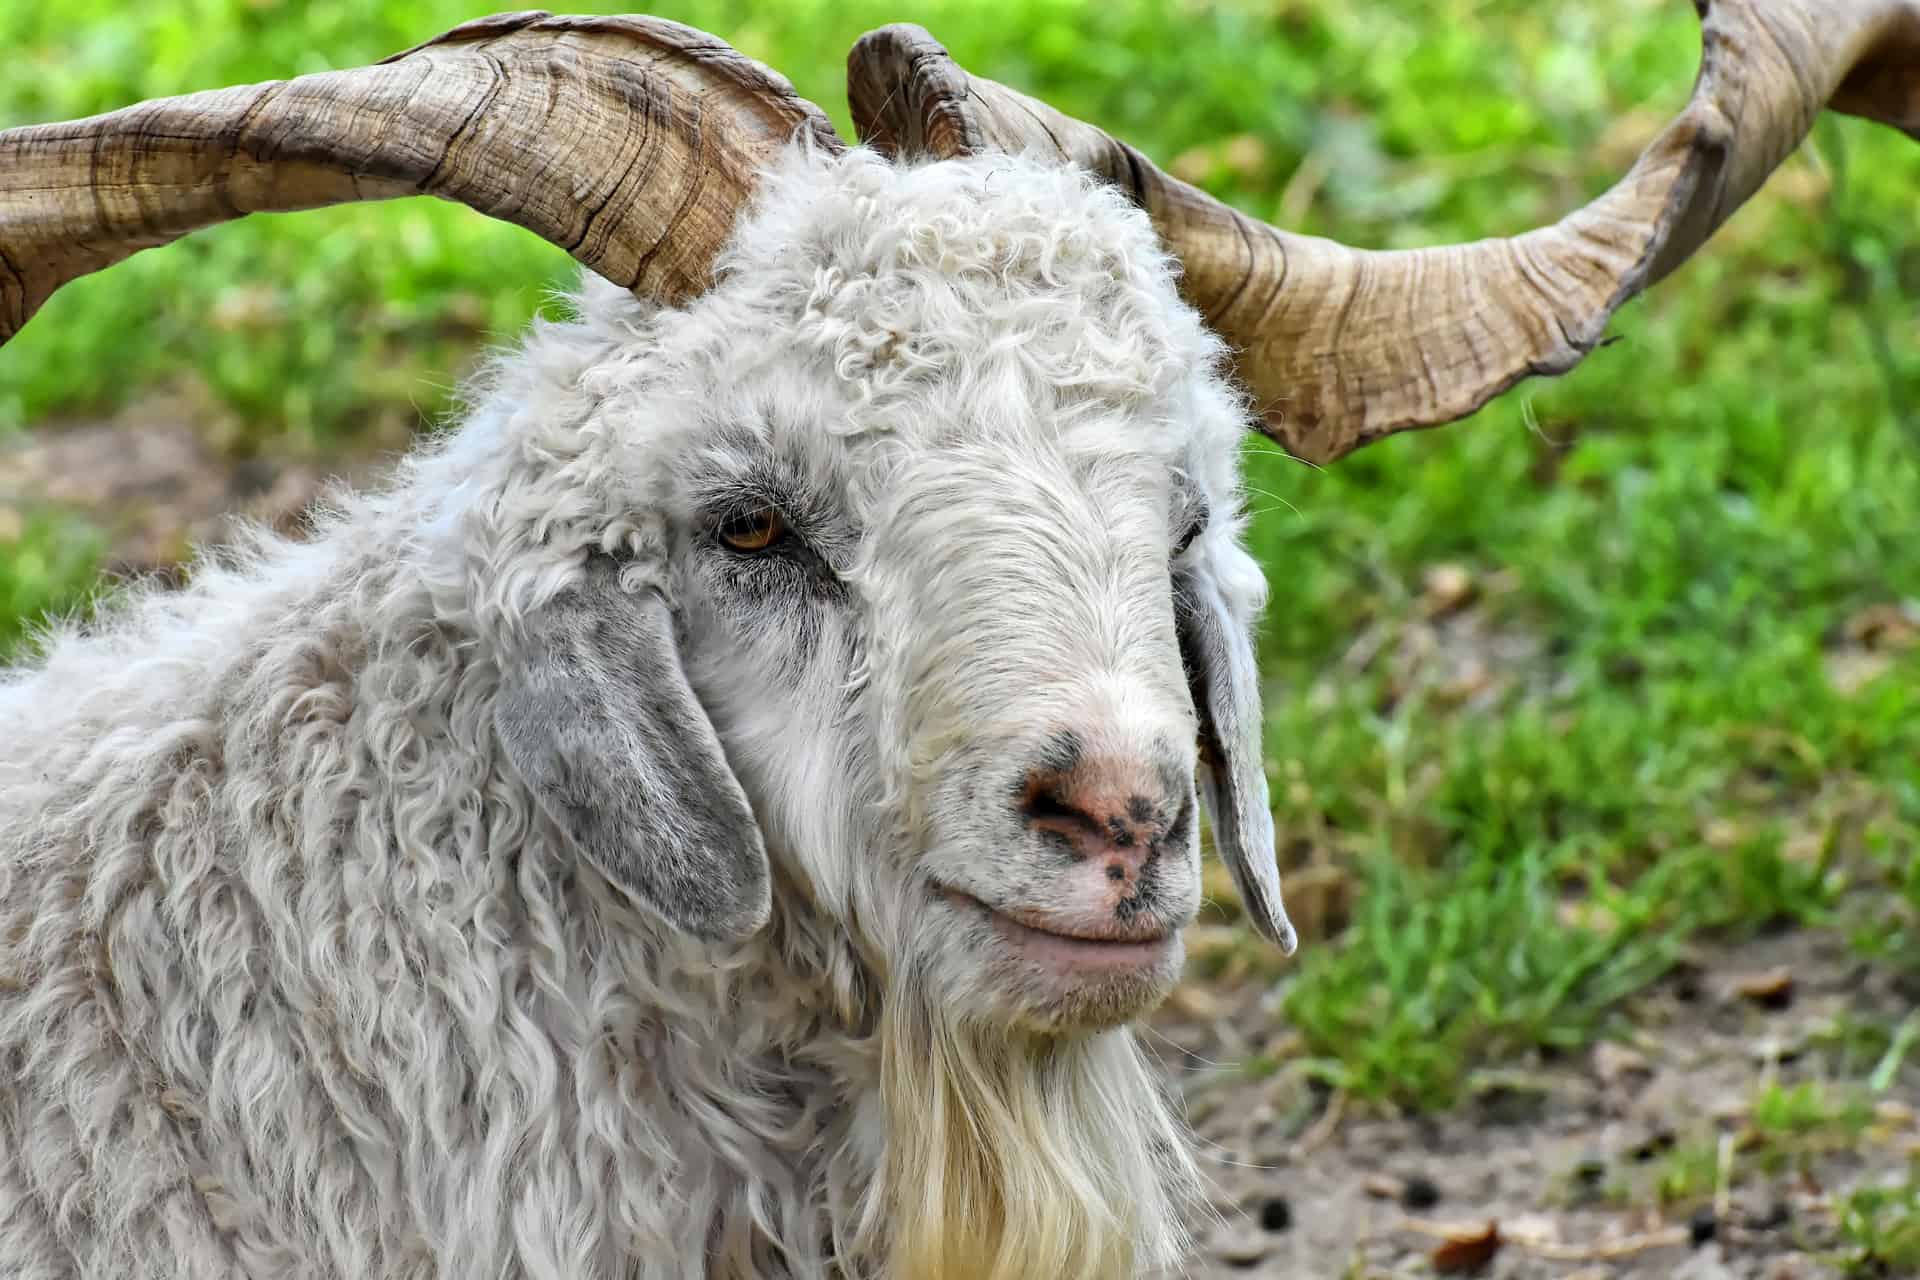 A goat with cashmere wool